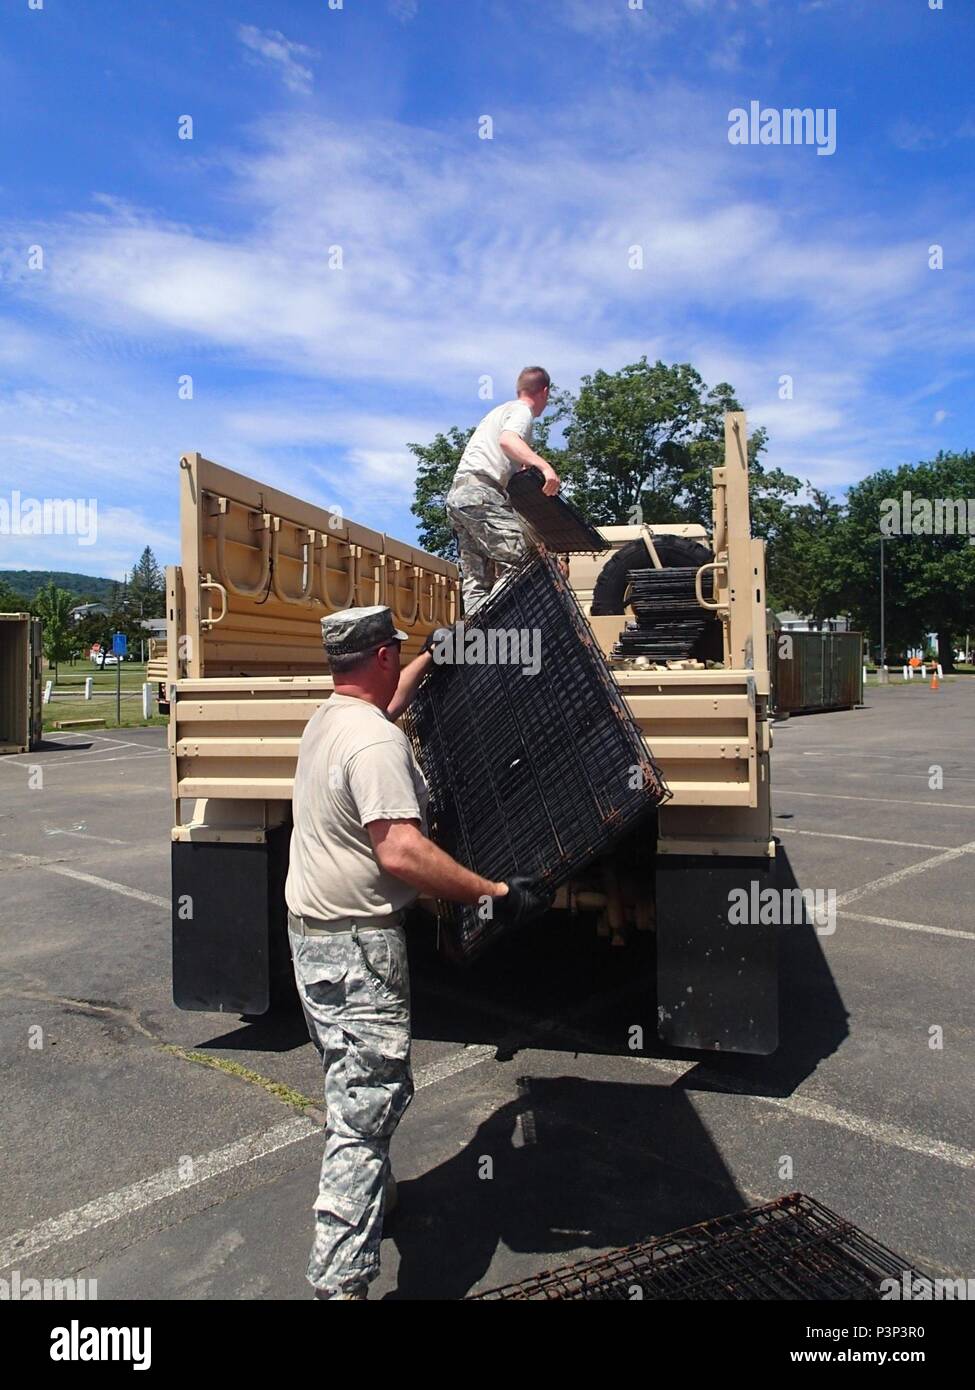 Service members from Company A, 48th Combat Support Hospital out of Fort Story, Va., helps pack up the veterinary section of the Greater Chenango Cares Innovative Readiness Training event, July 24, 2016.  Greater Chenango Cares is one of the IRT events which provides real-world training in a joint civil-military environment while delivering world-class medical care to the people of Chenango County, N.Y., from July 15-24. Stock Photo